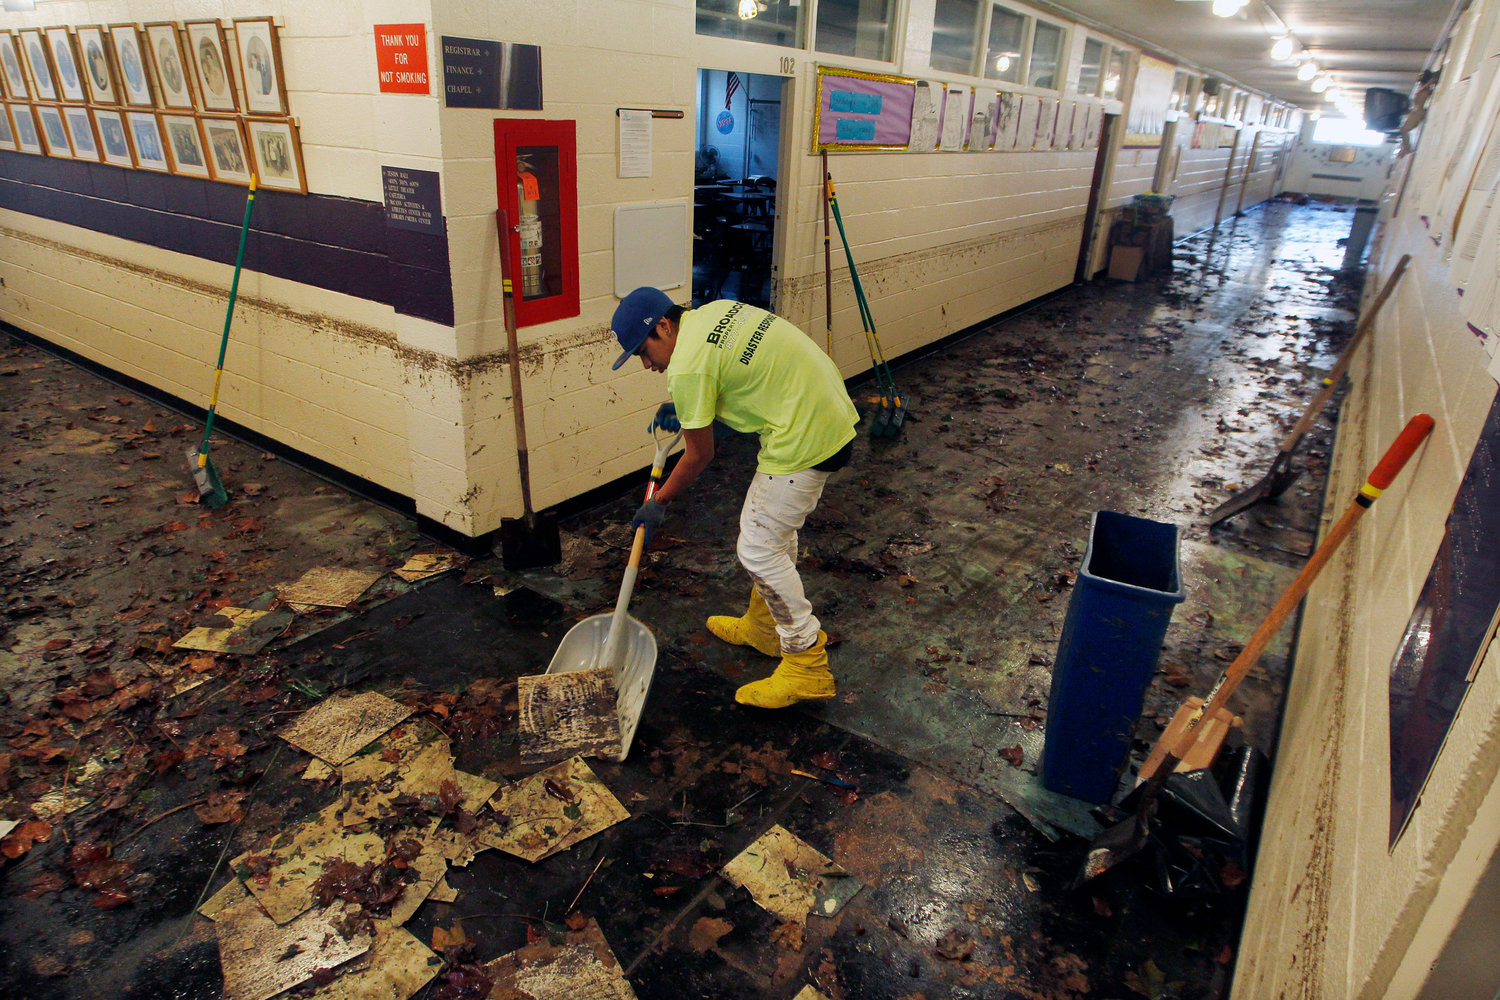 FILE - A worker scrapes up mud and tiles from flood-damaged Saint Rose High School in Belmar, N.J., on Nov. 4, 2012, after storm surge caused by Superstorm Sandy. 90% of counties in the United States experienced a weather-related disaster between 2011-2021, according to a report published on Wednesday, Nov. 16, 2022. Over 300 million people ‚Äî 93% of the country‚Äôs population ‚Äî live in those counties. (AP Photo/Mel Evans, File)